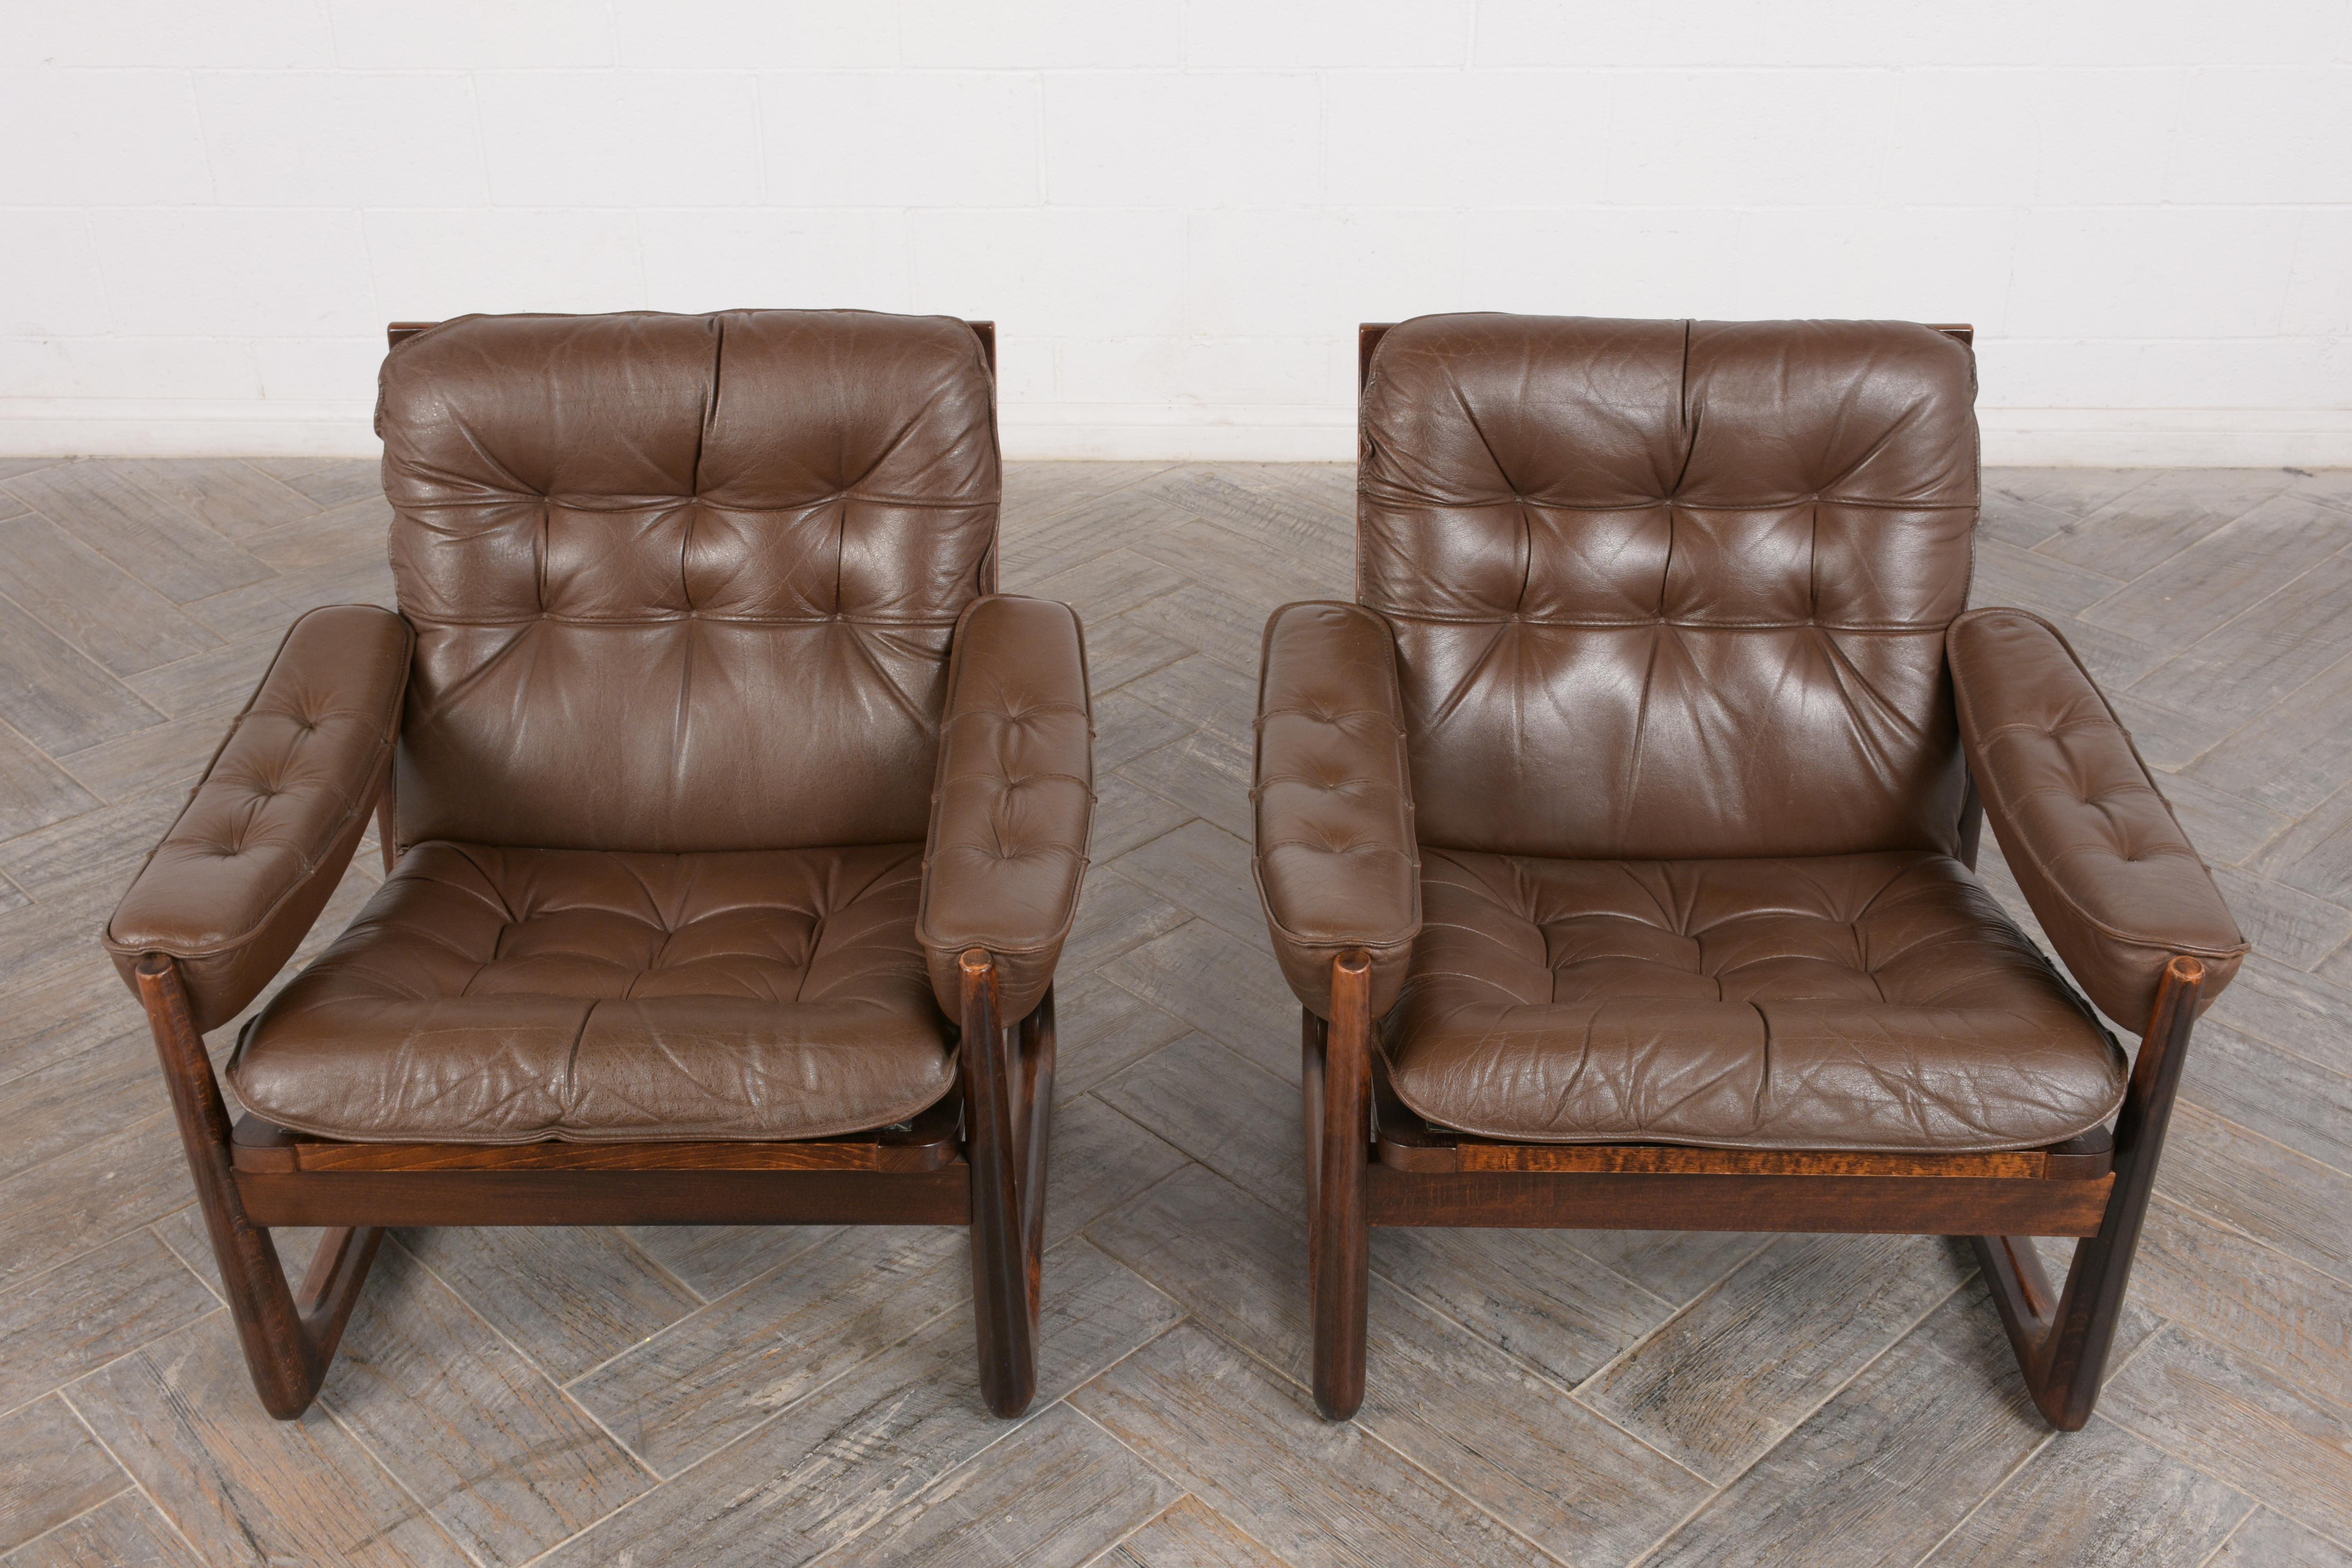 This pair of 1960's Danish Leather Lounge Chairs by Oddvar Vad is made out of solid rosewood with a patina finish and is professionally restored. These Bauhaus-style club chairs are upholstered in their original dark brown leather which is in great